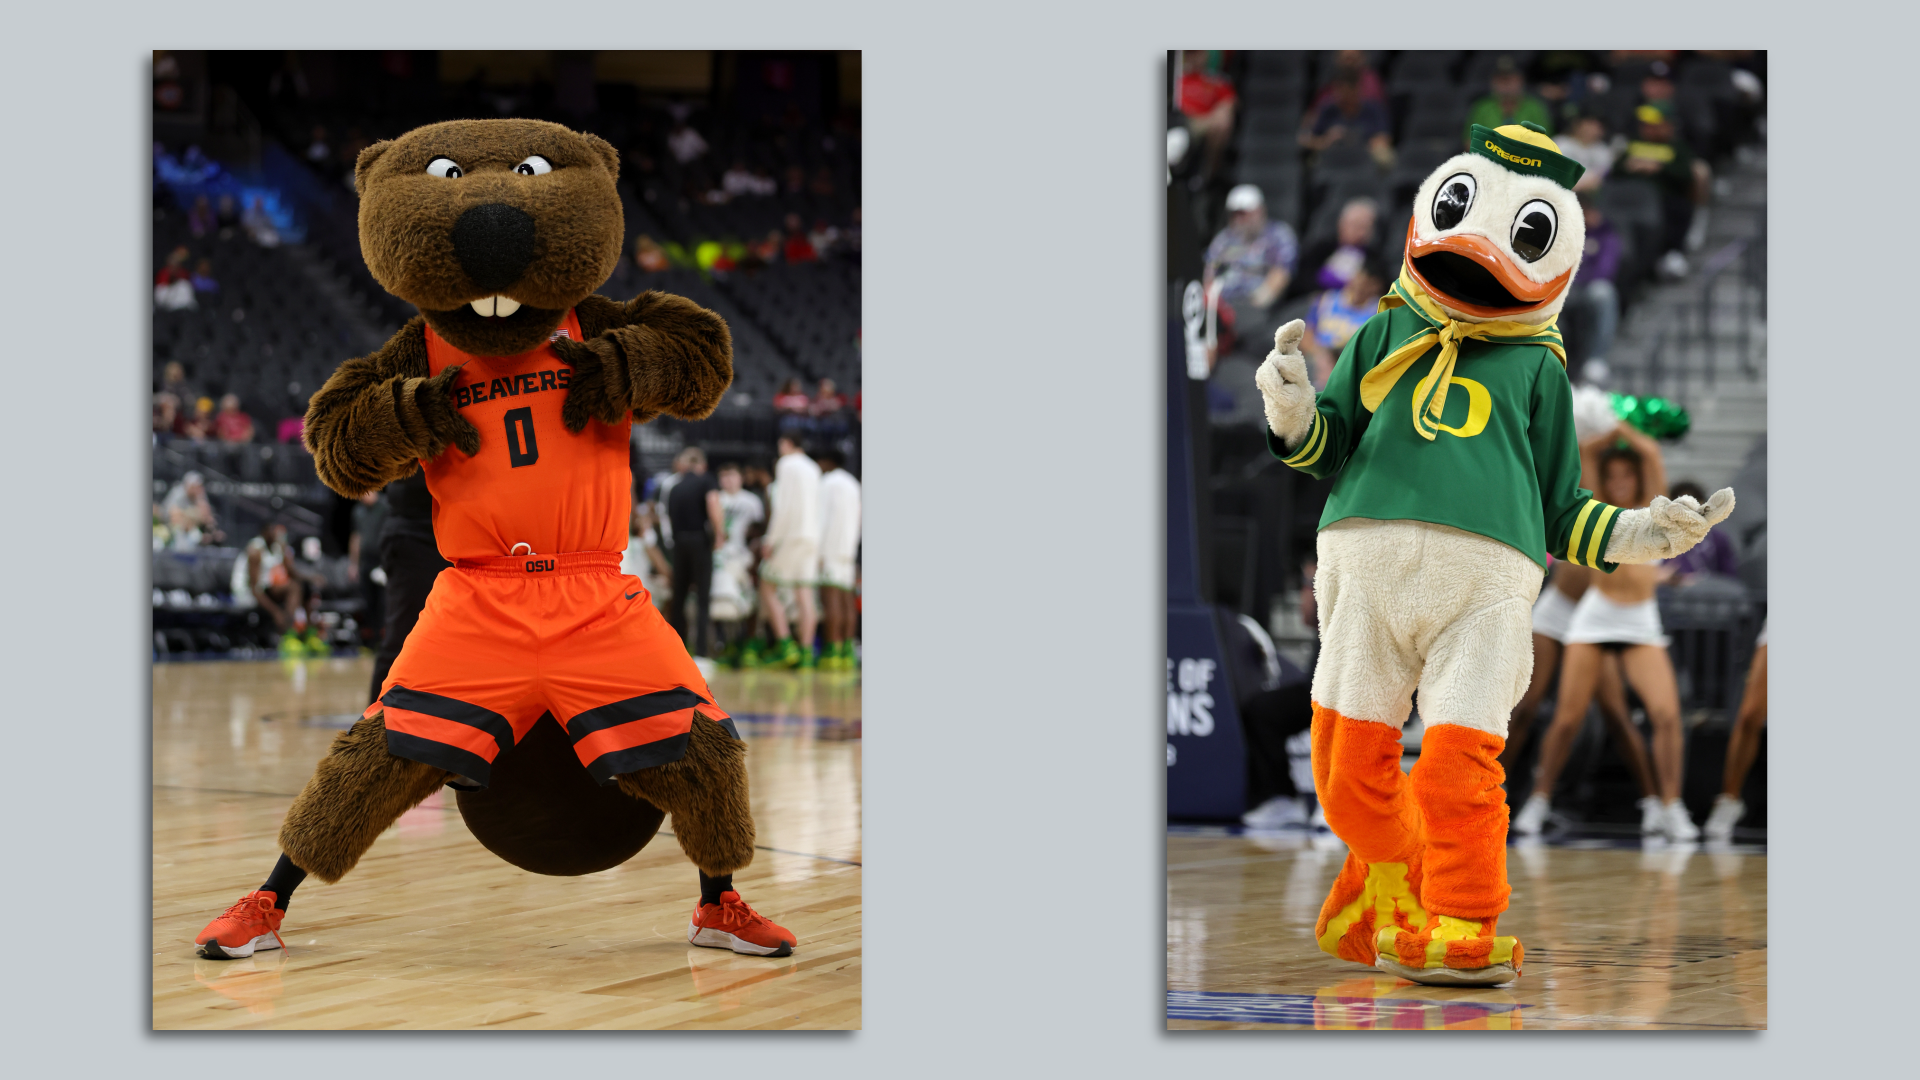 A person dressed up as a furry brown beaver mascot, wearing orange jersey and shorts,  in a photo to the left of a picture of a person dressed up as a white duck, wearing a green jersey with the University of Oregon letter O in yellow on the front.